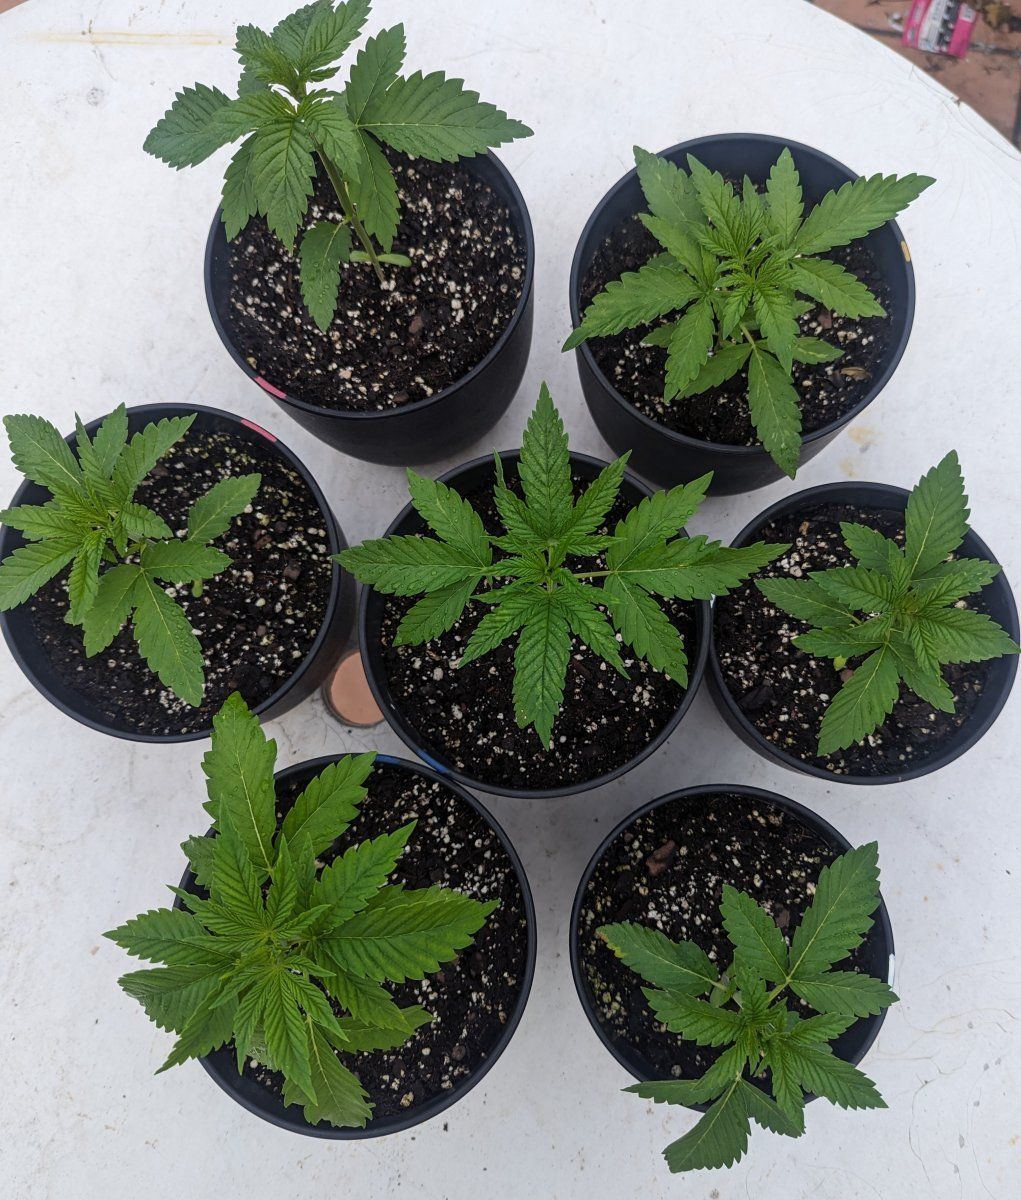 2 purple ghost candy  2 lsd  2 original glue and 1 critical 20 auto germinated in dirt on st p